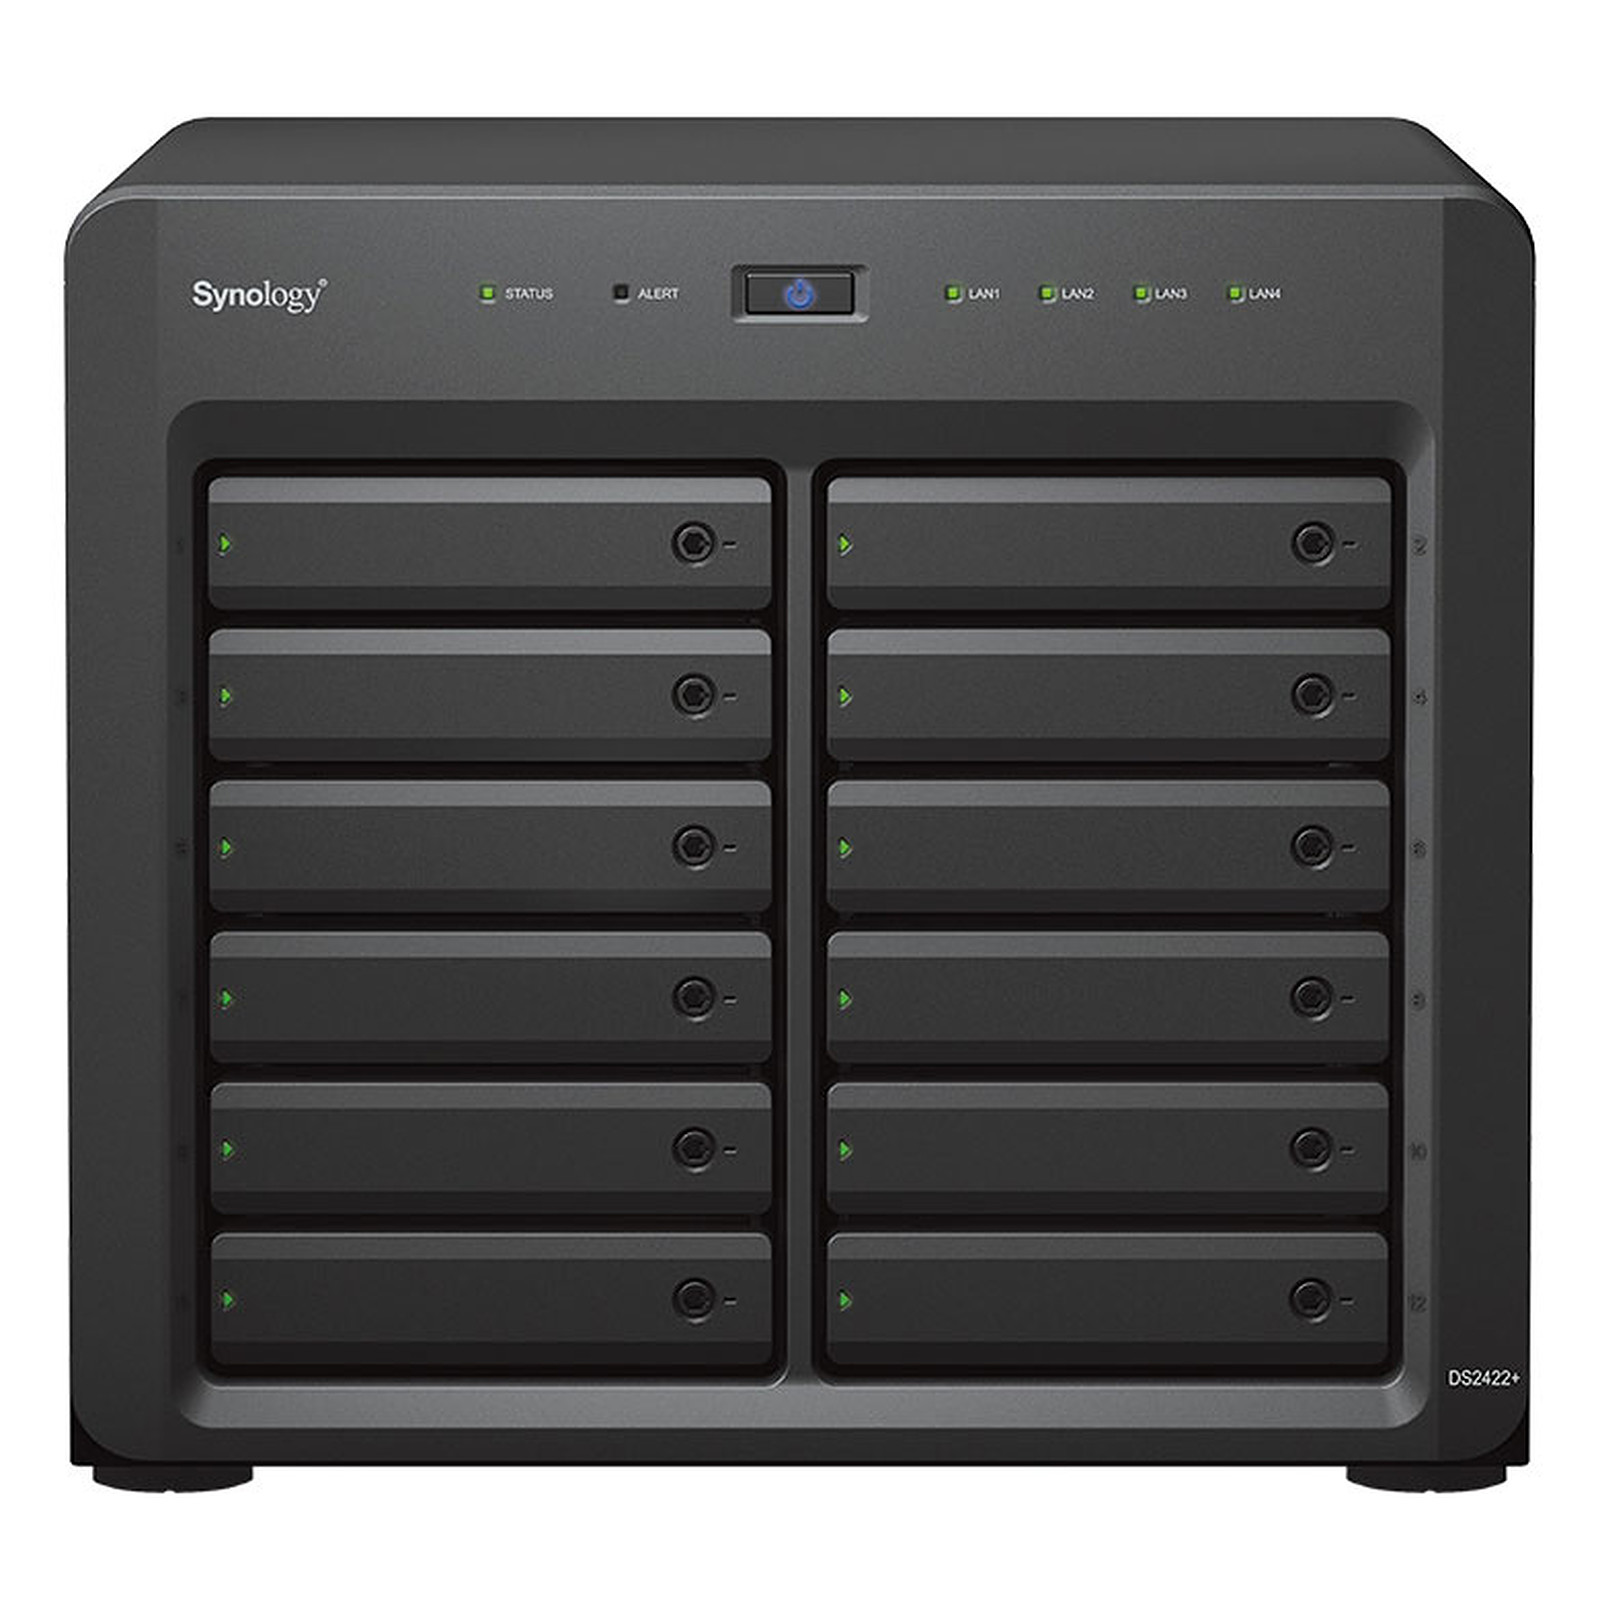 Synology DiskStation DS2422+ - Serveur NAS Synology